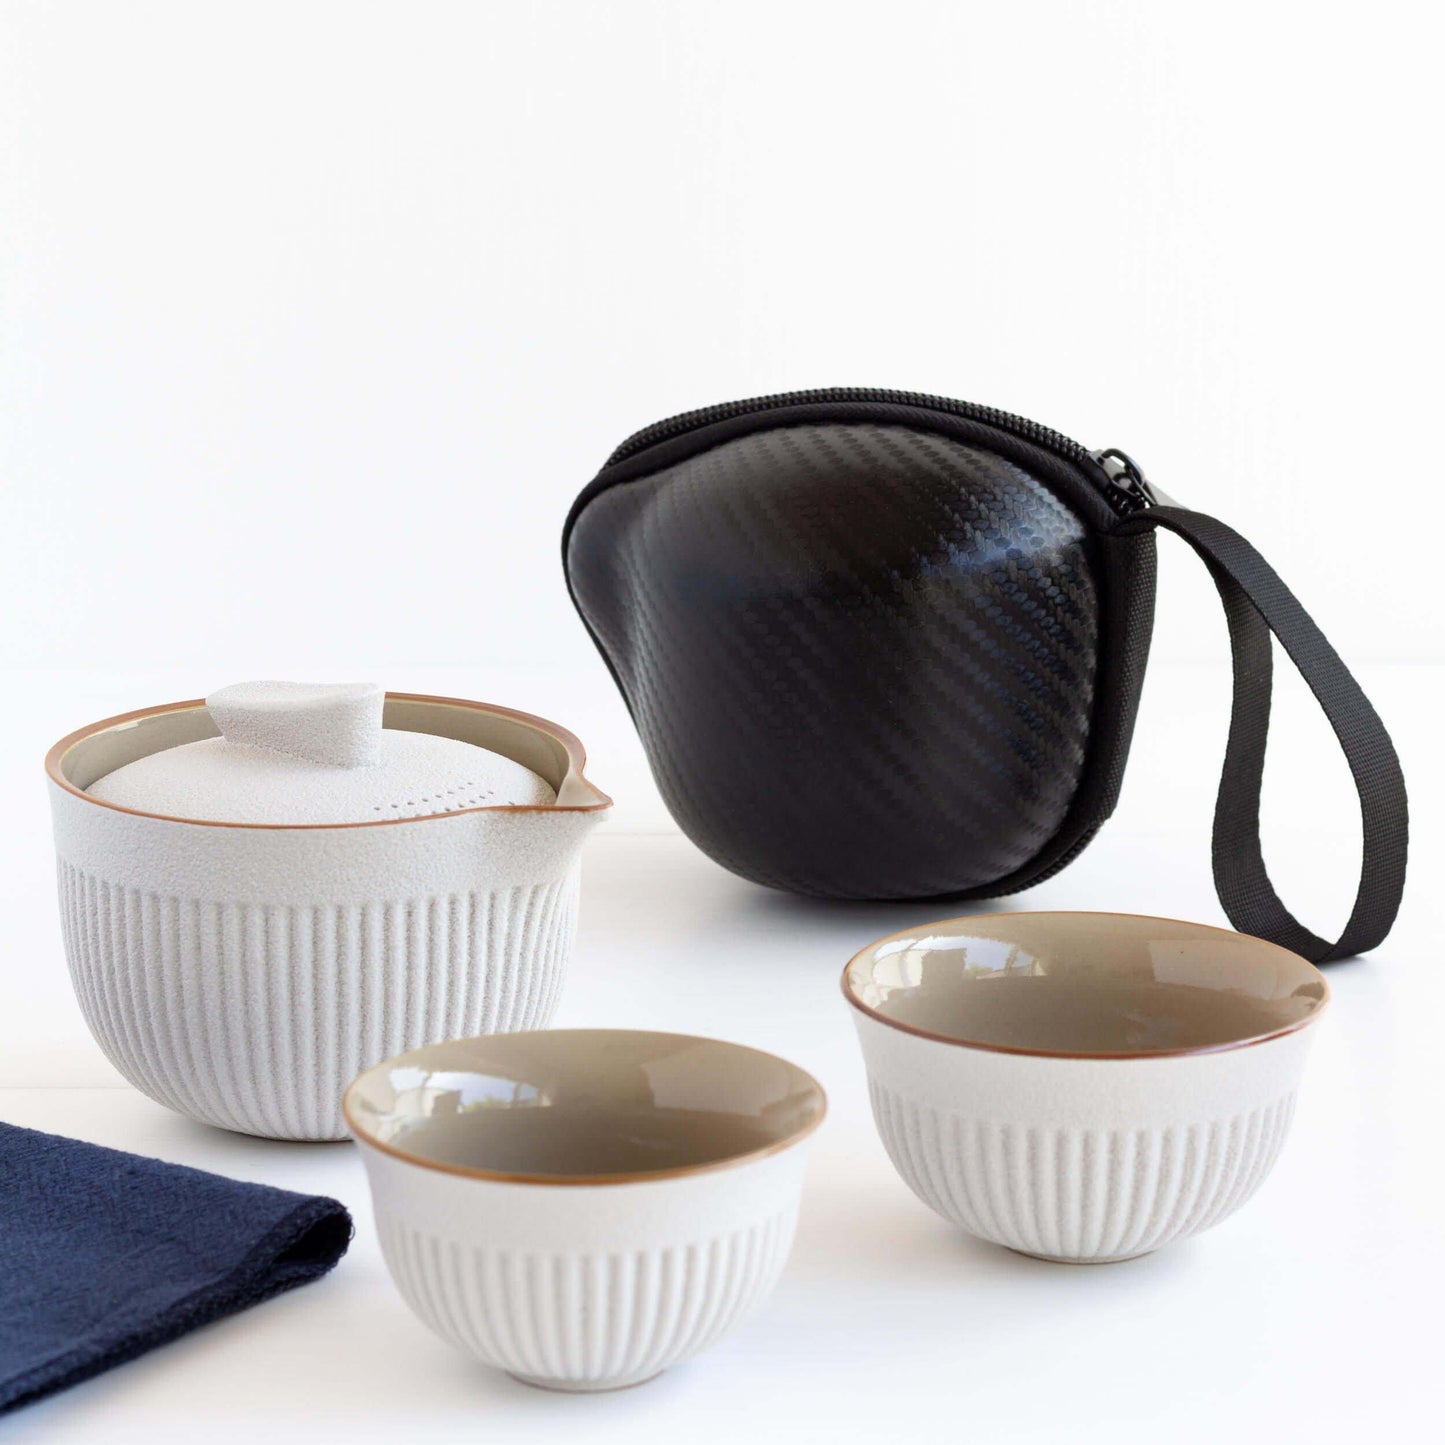 Tea travel set with two cups and case